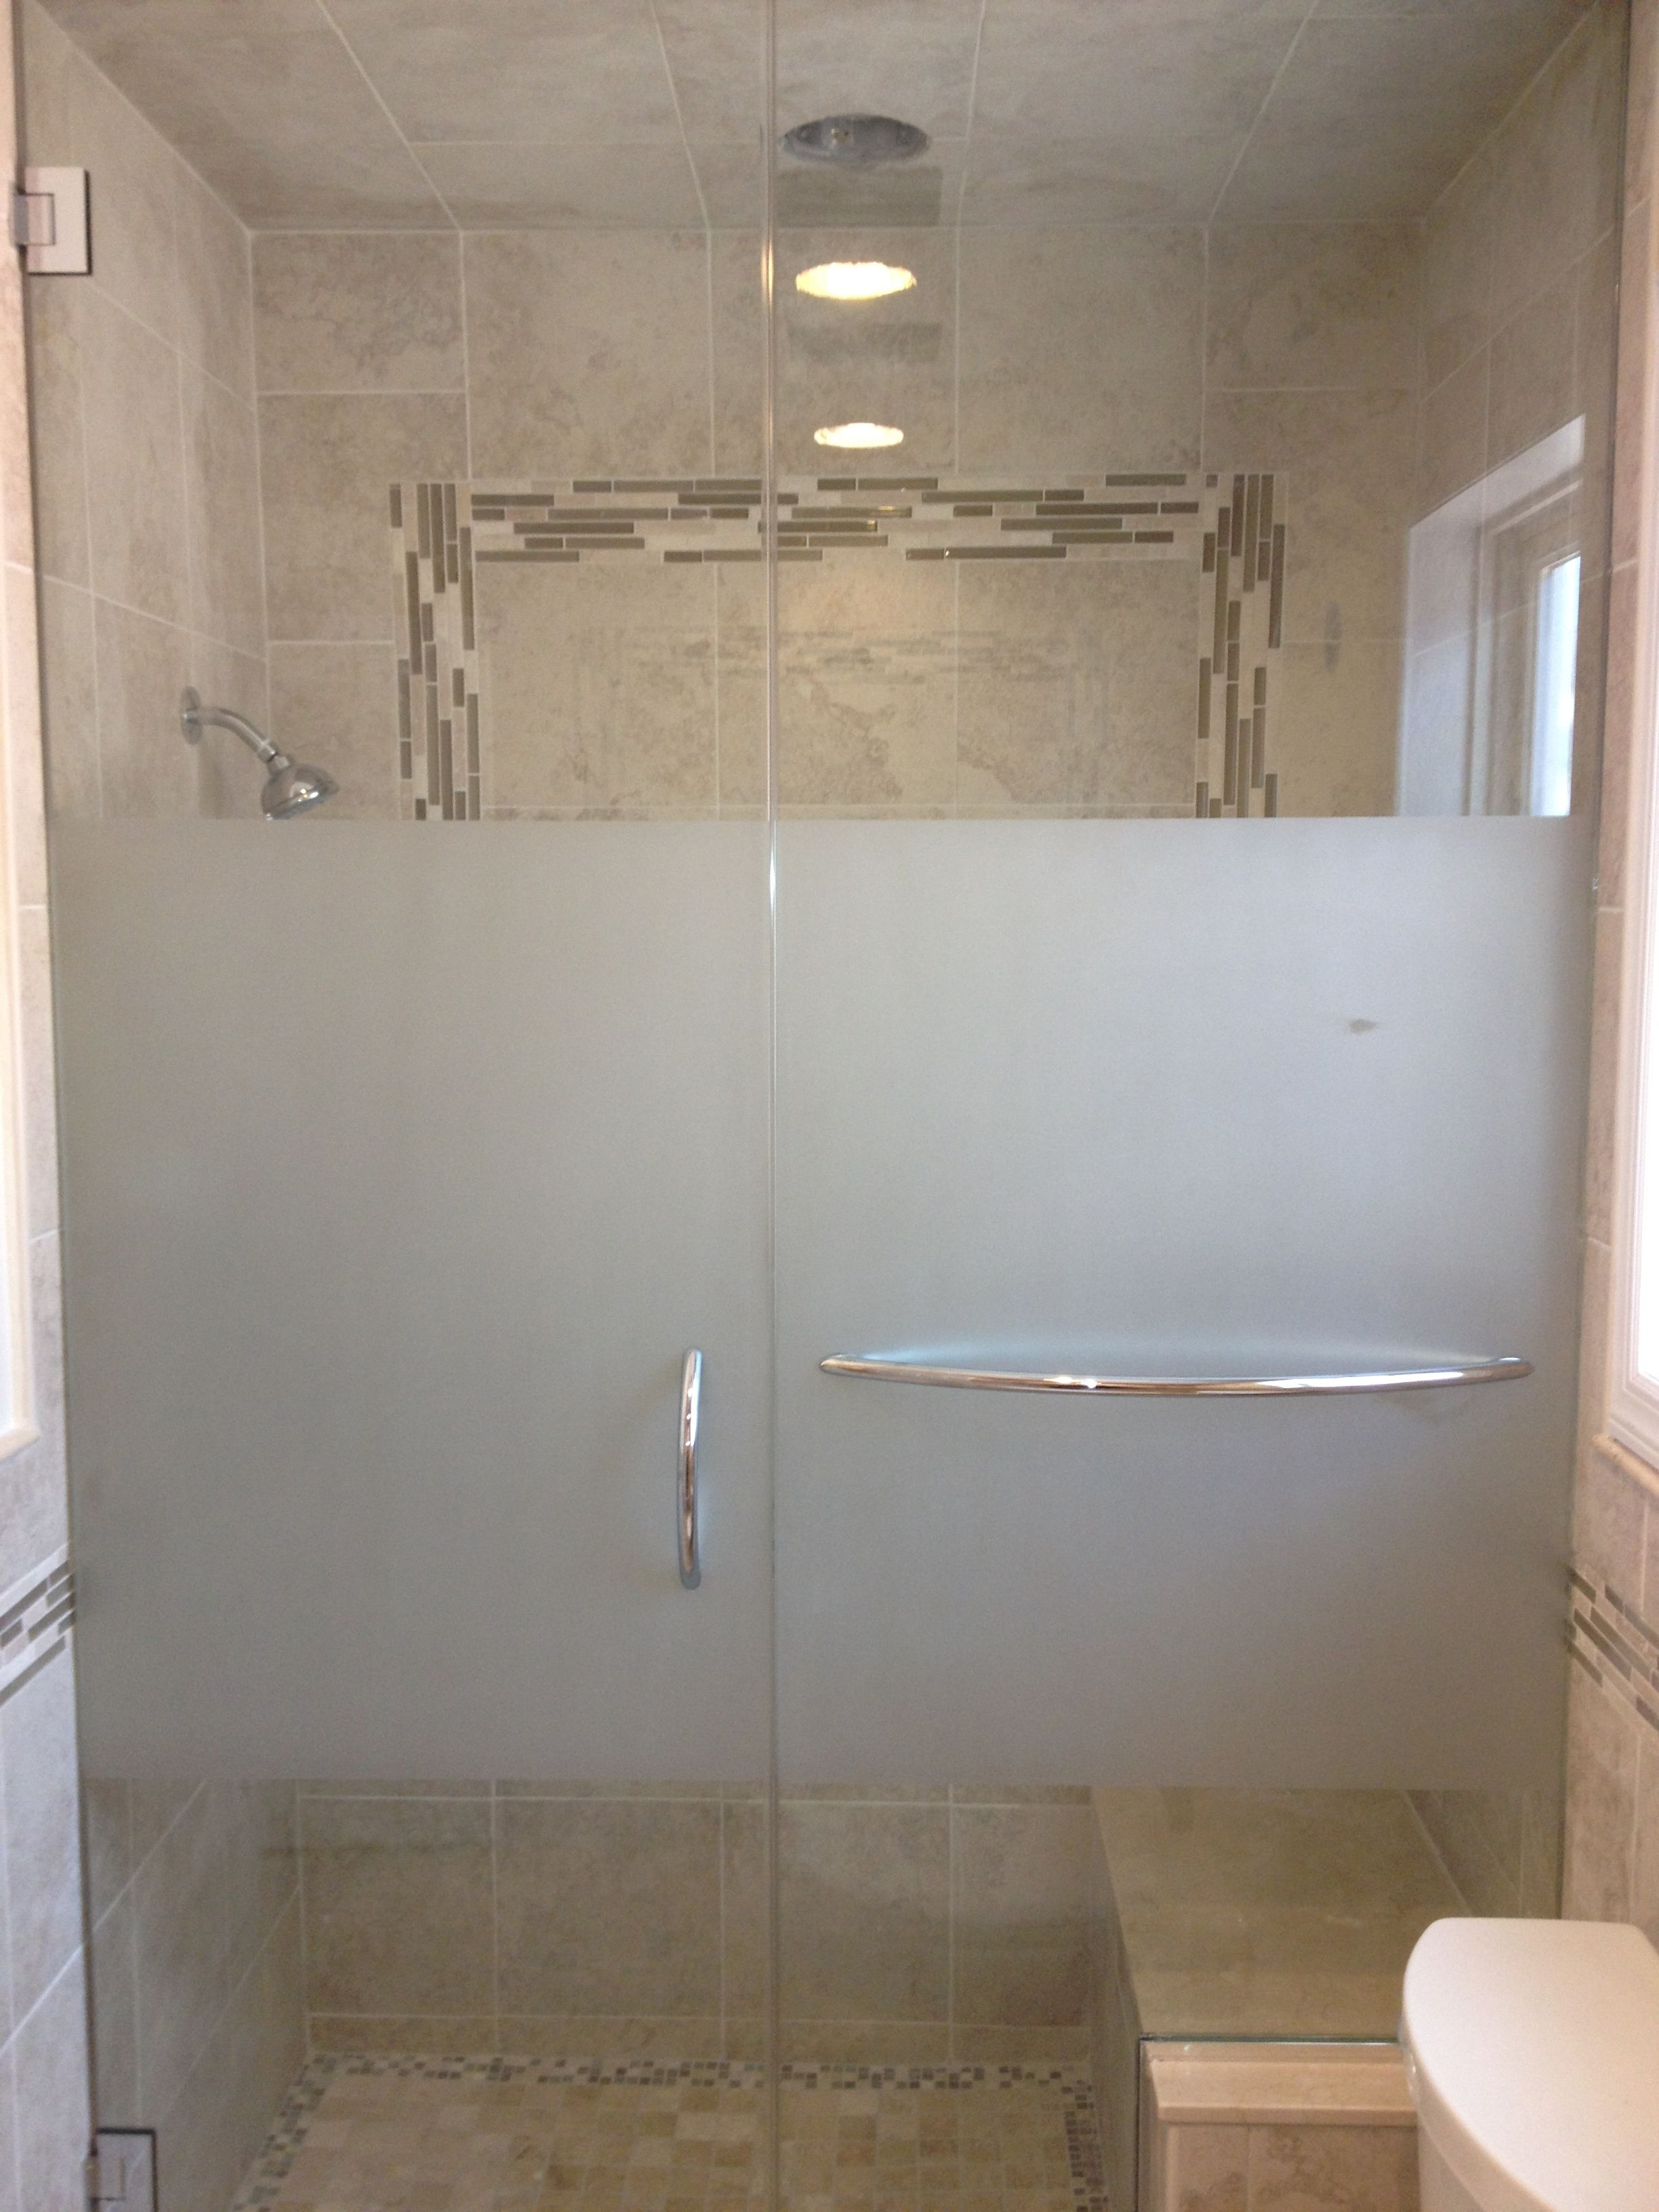 Modren Frosted Shower Doors Glass Pattern F For Design Inspiration throughout proportions 2448 X 3264